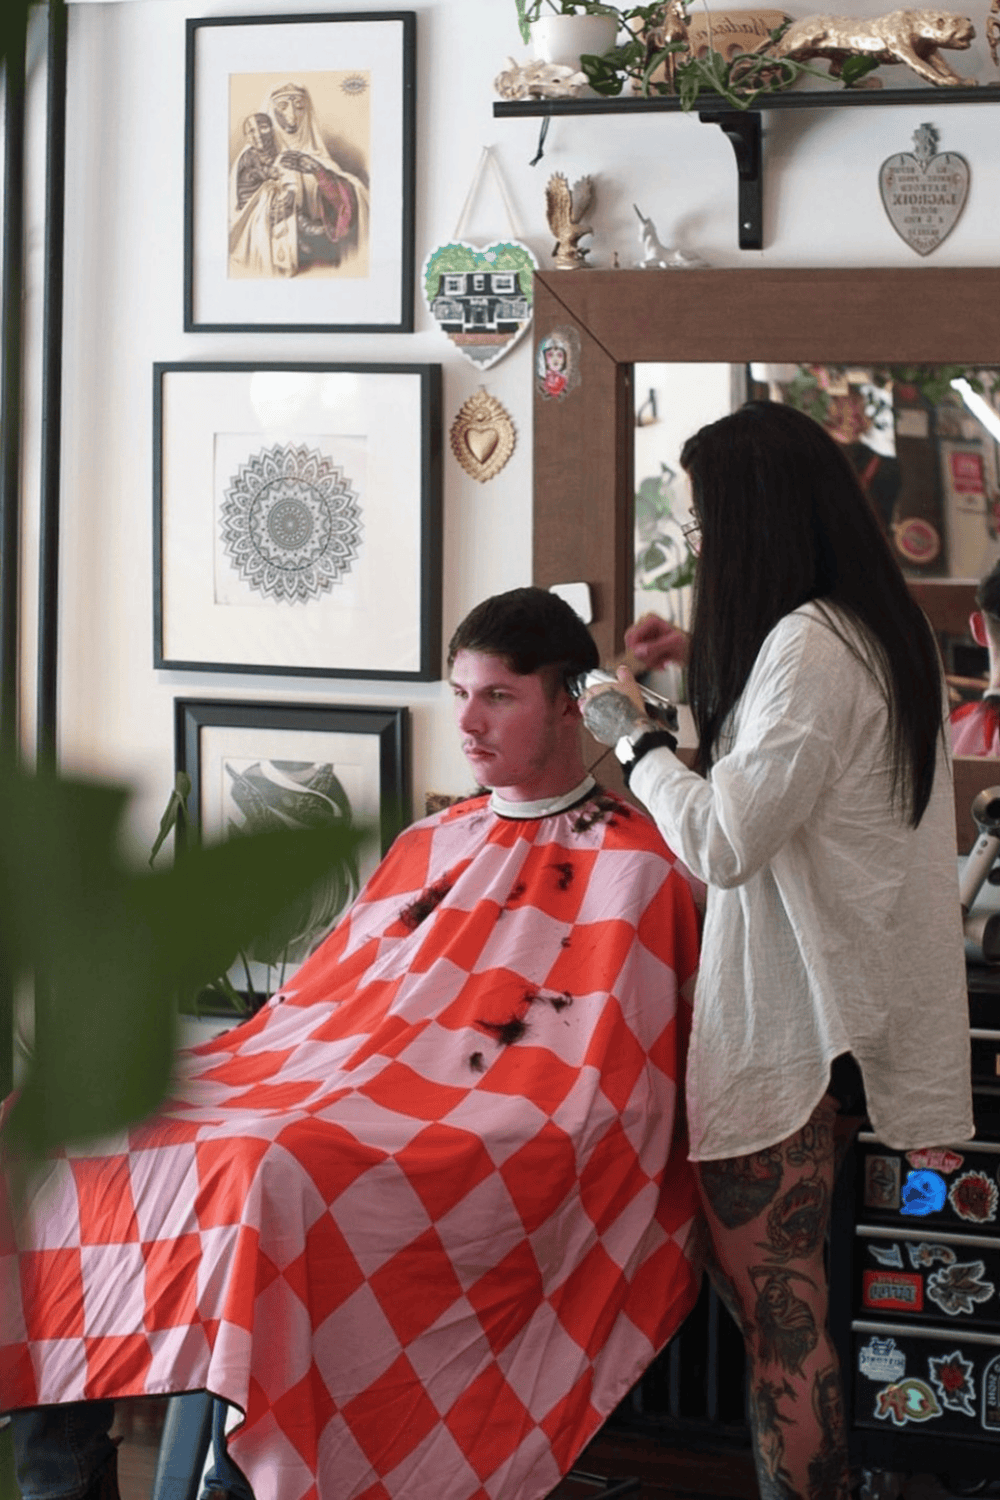 The 11 Best Barber Capes That Are Functional & Reusable – 2023